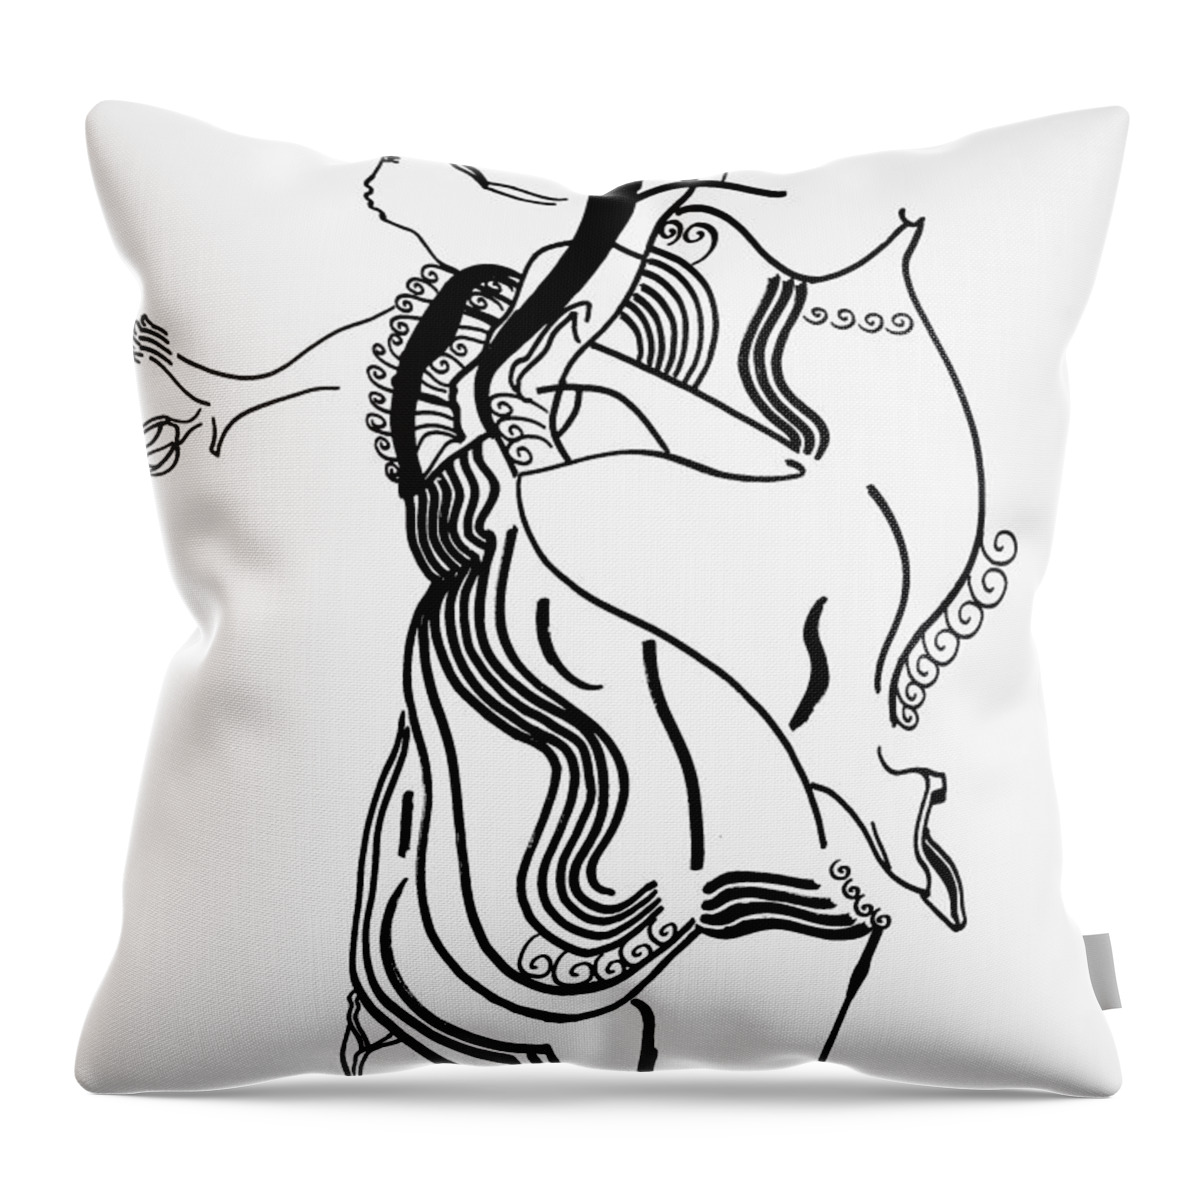 Jesus Throw Pillow featuring the drawing Flamenco Dance by Gloria Ssali